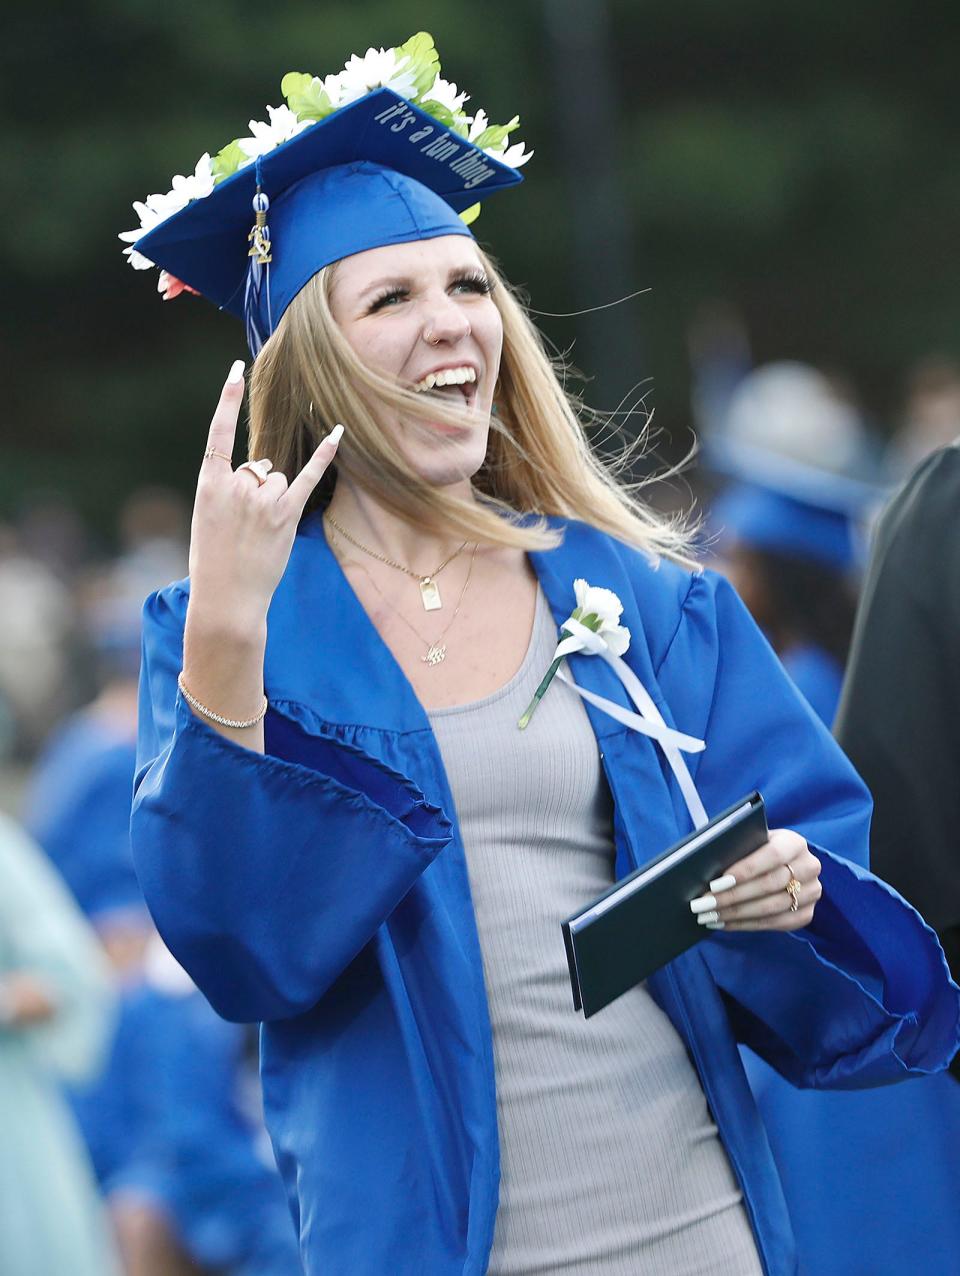 Quincy High graduate Tia Nicole DiBona breaks out in wide smile during graduation ceremonies at Veterans Stadium for more than 400 graduates on Tuesday, June 7, 2022.